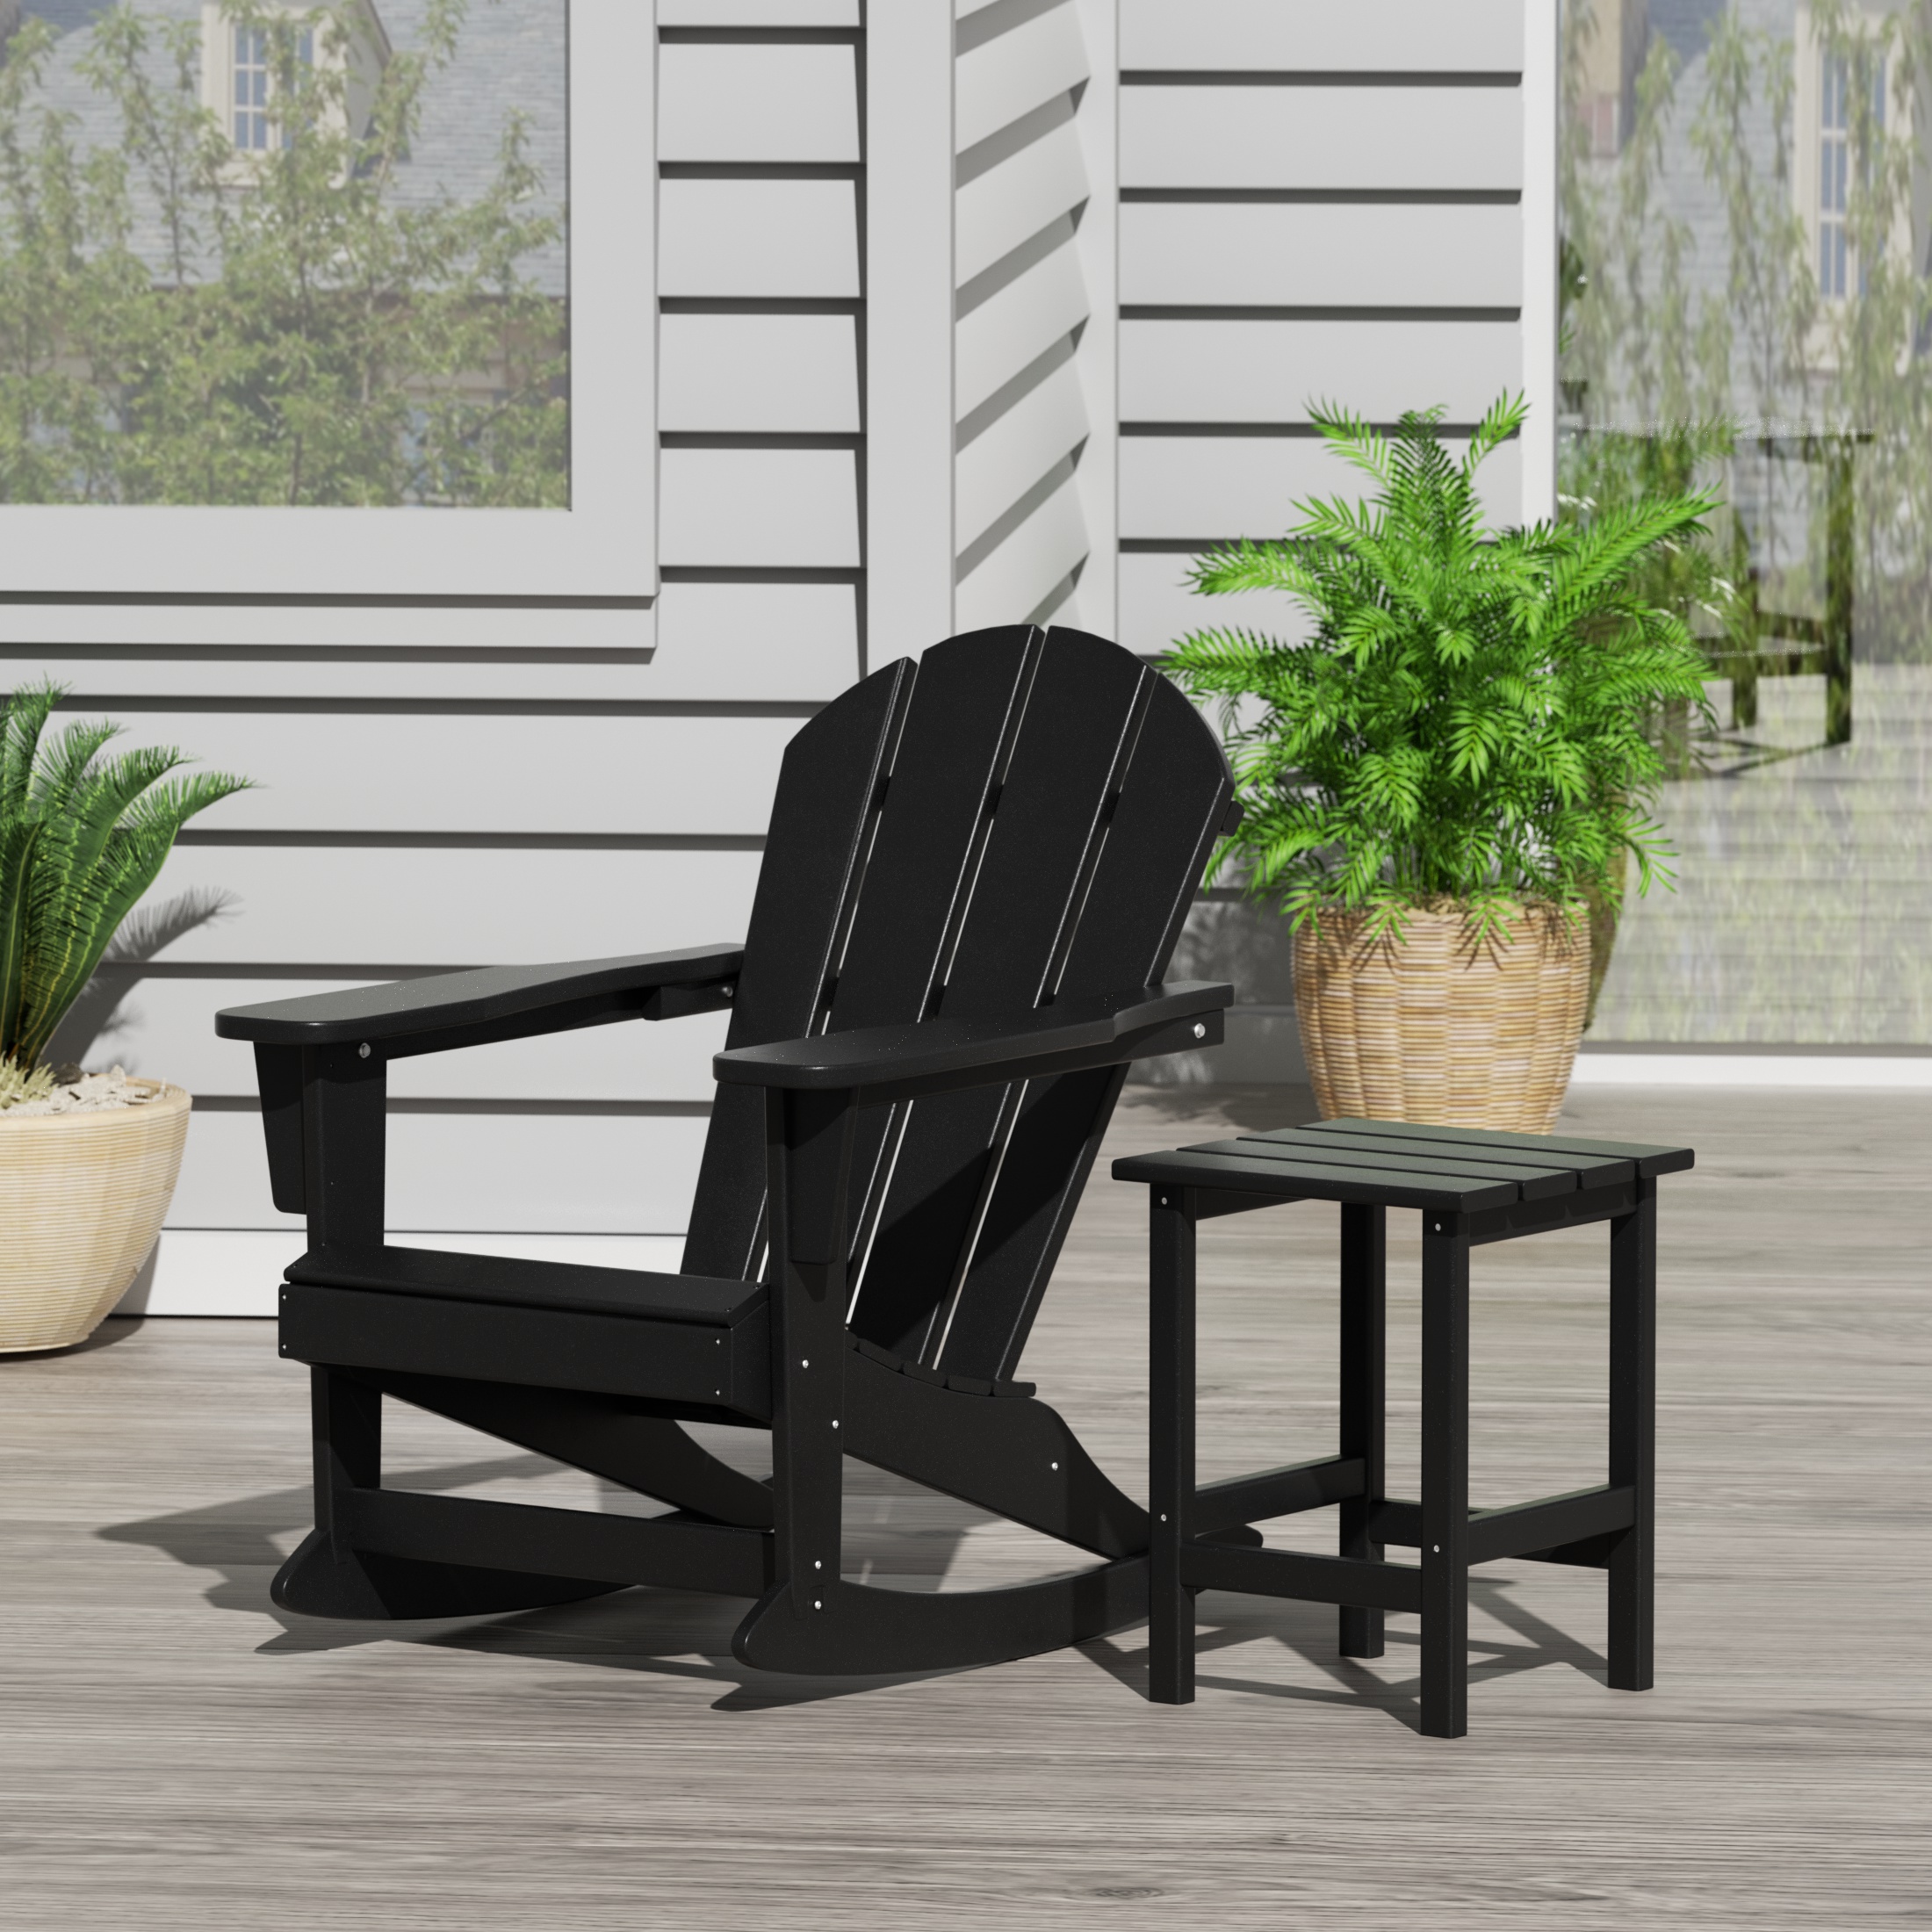 WestinTrends Malibu 2 Piece Outdoor Rocking Chair Set, All Weather Poly Lumber Porch Patio Adirondack Rocking Chair with Side Table, Black - image 2 of 8